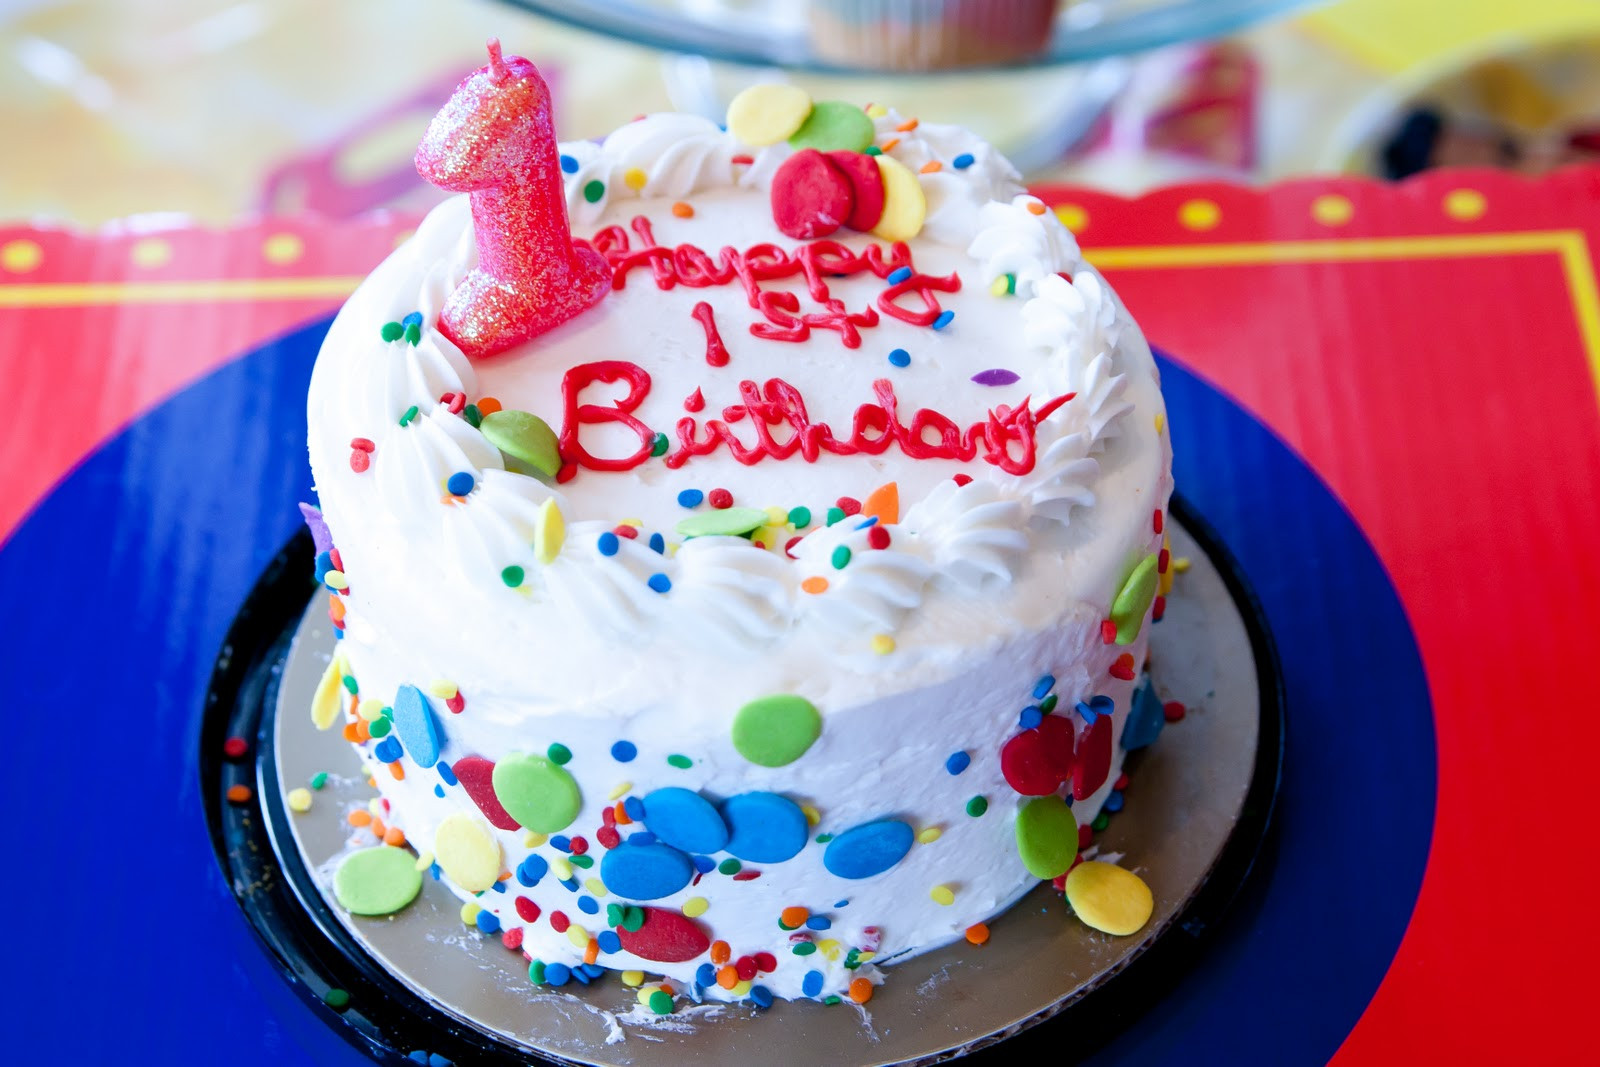 Walmart Custom Birthday Cakes
 Home Tips Kids Will Have A Fun With Walmart Cake Designs